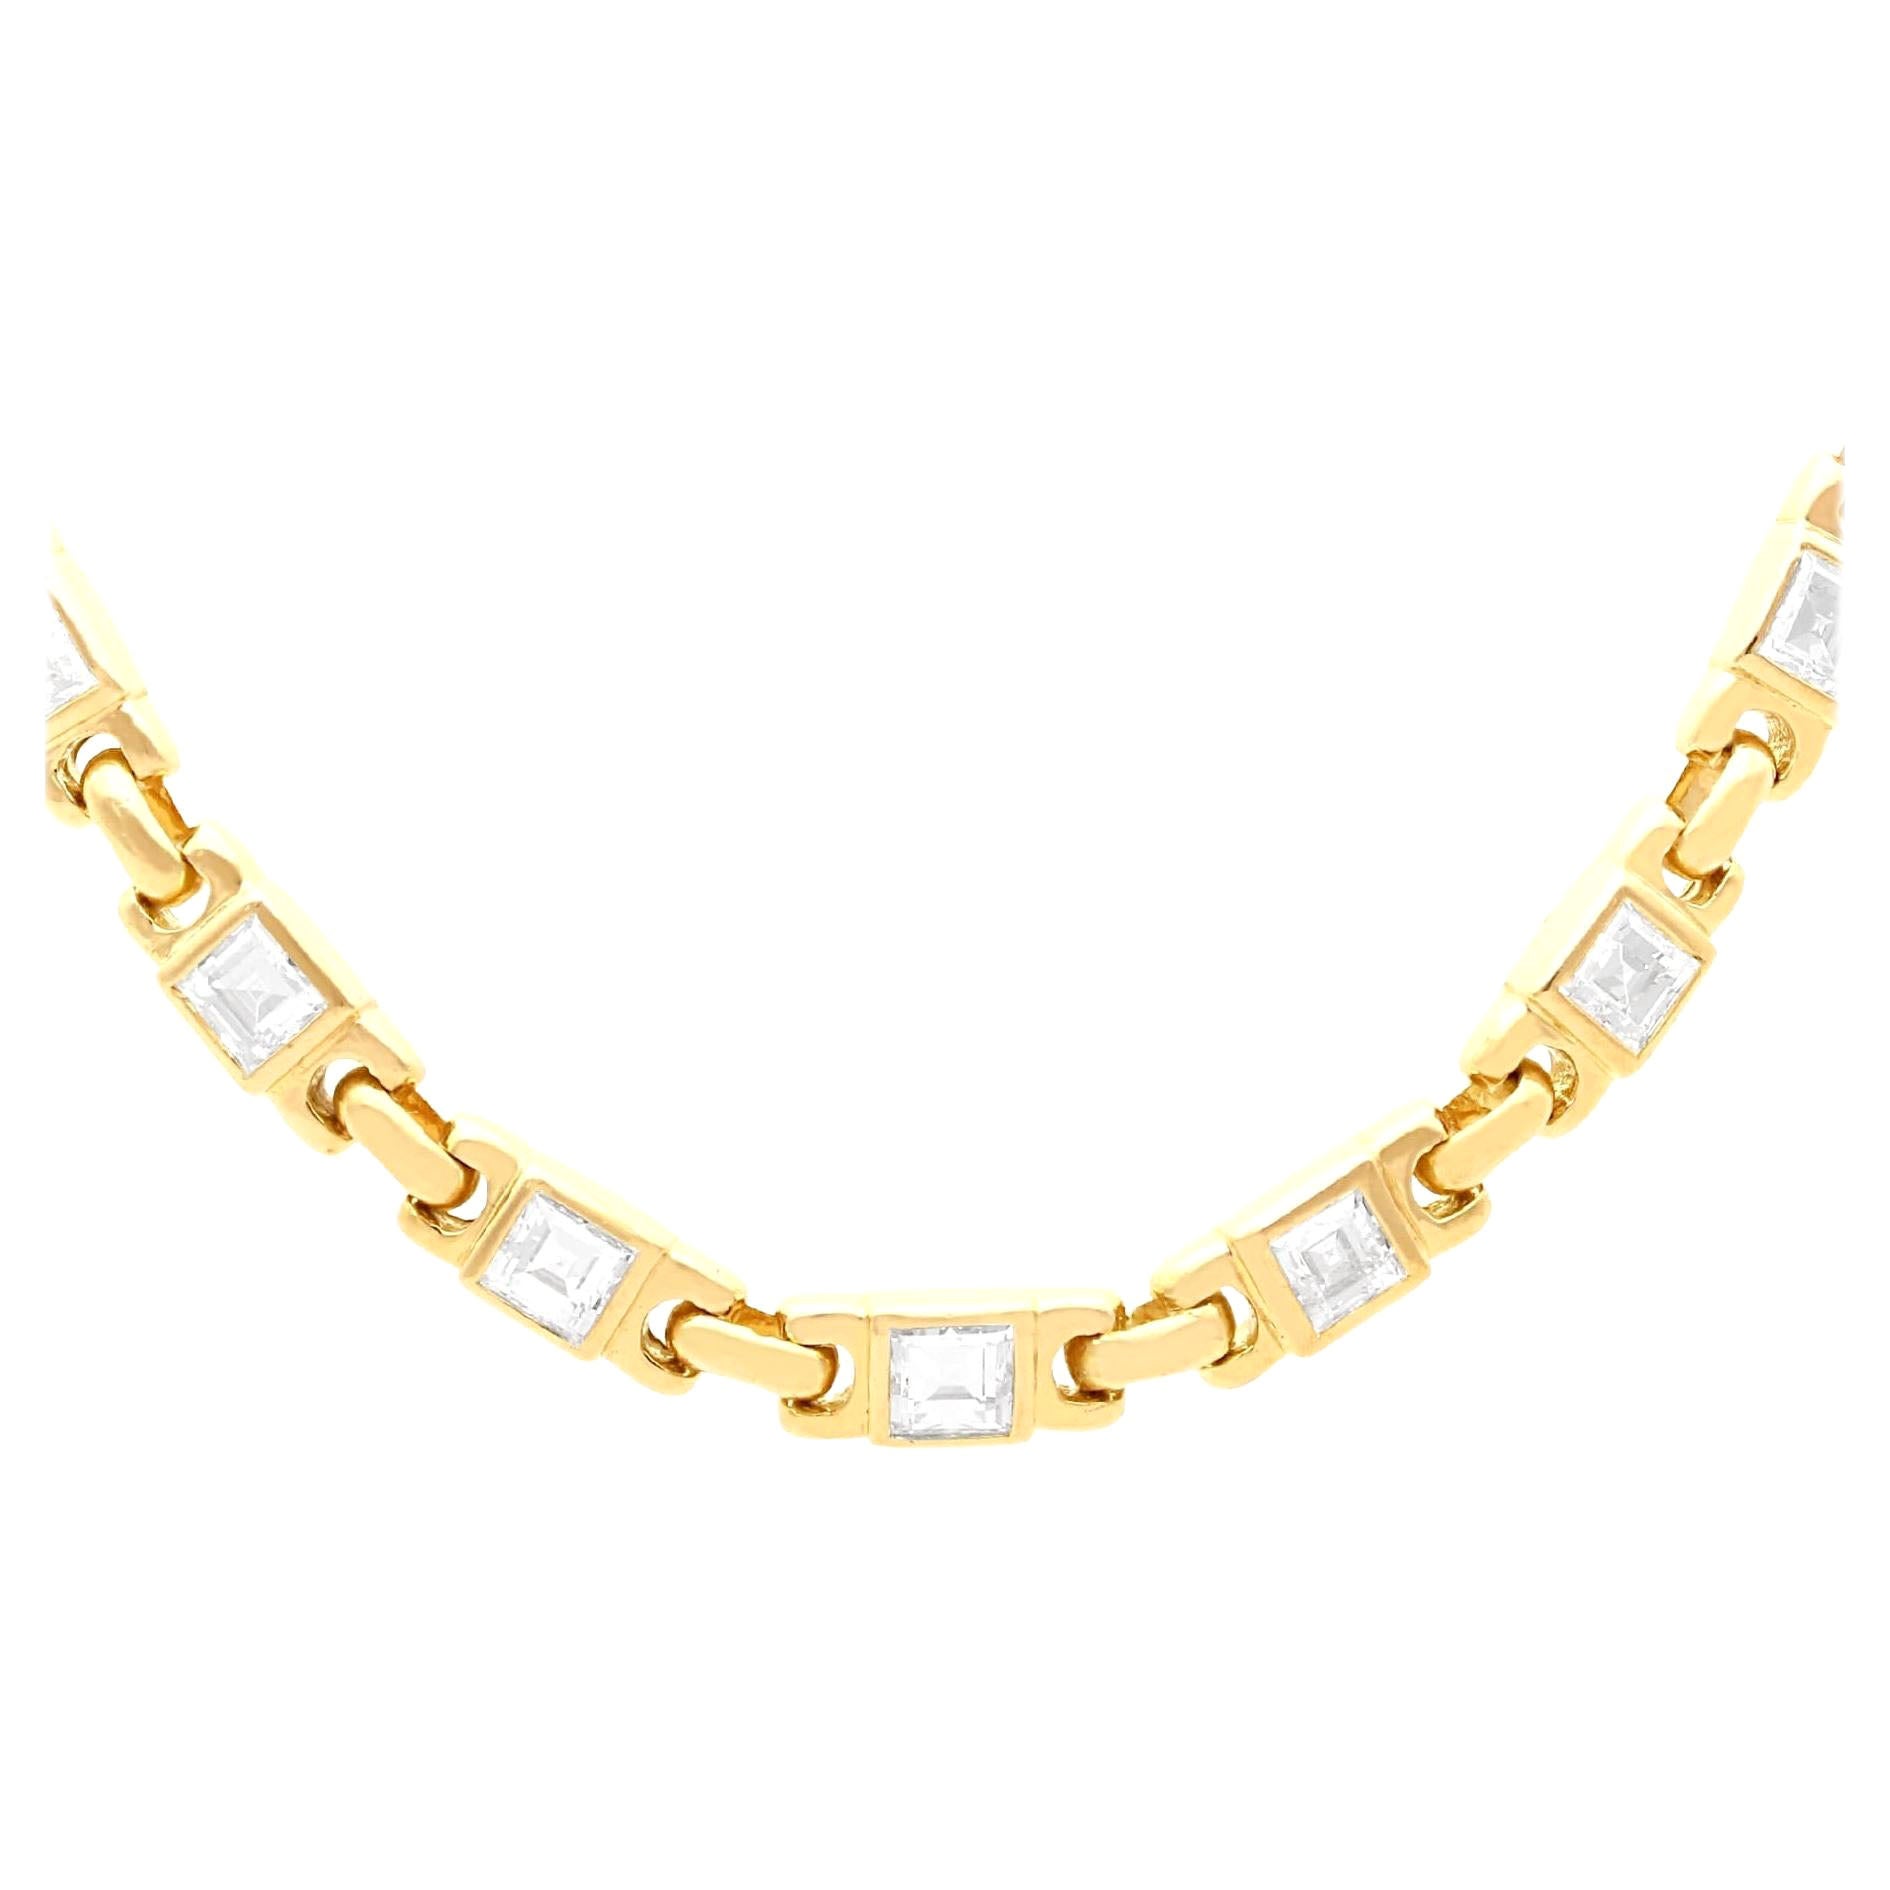 Vintage 3 Carat Diamond and 18K Yellow Gold Necklace For Sale